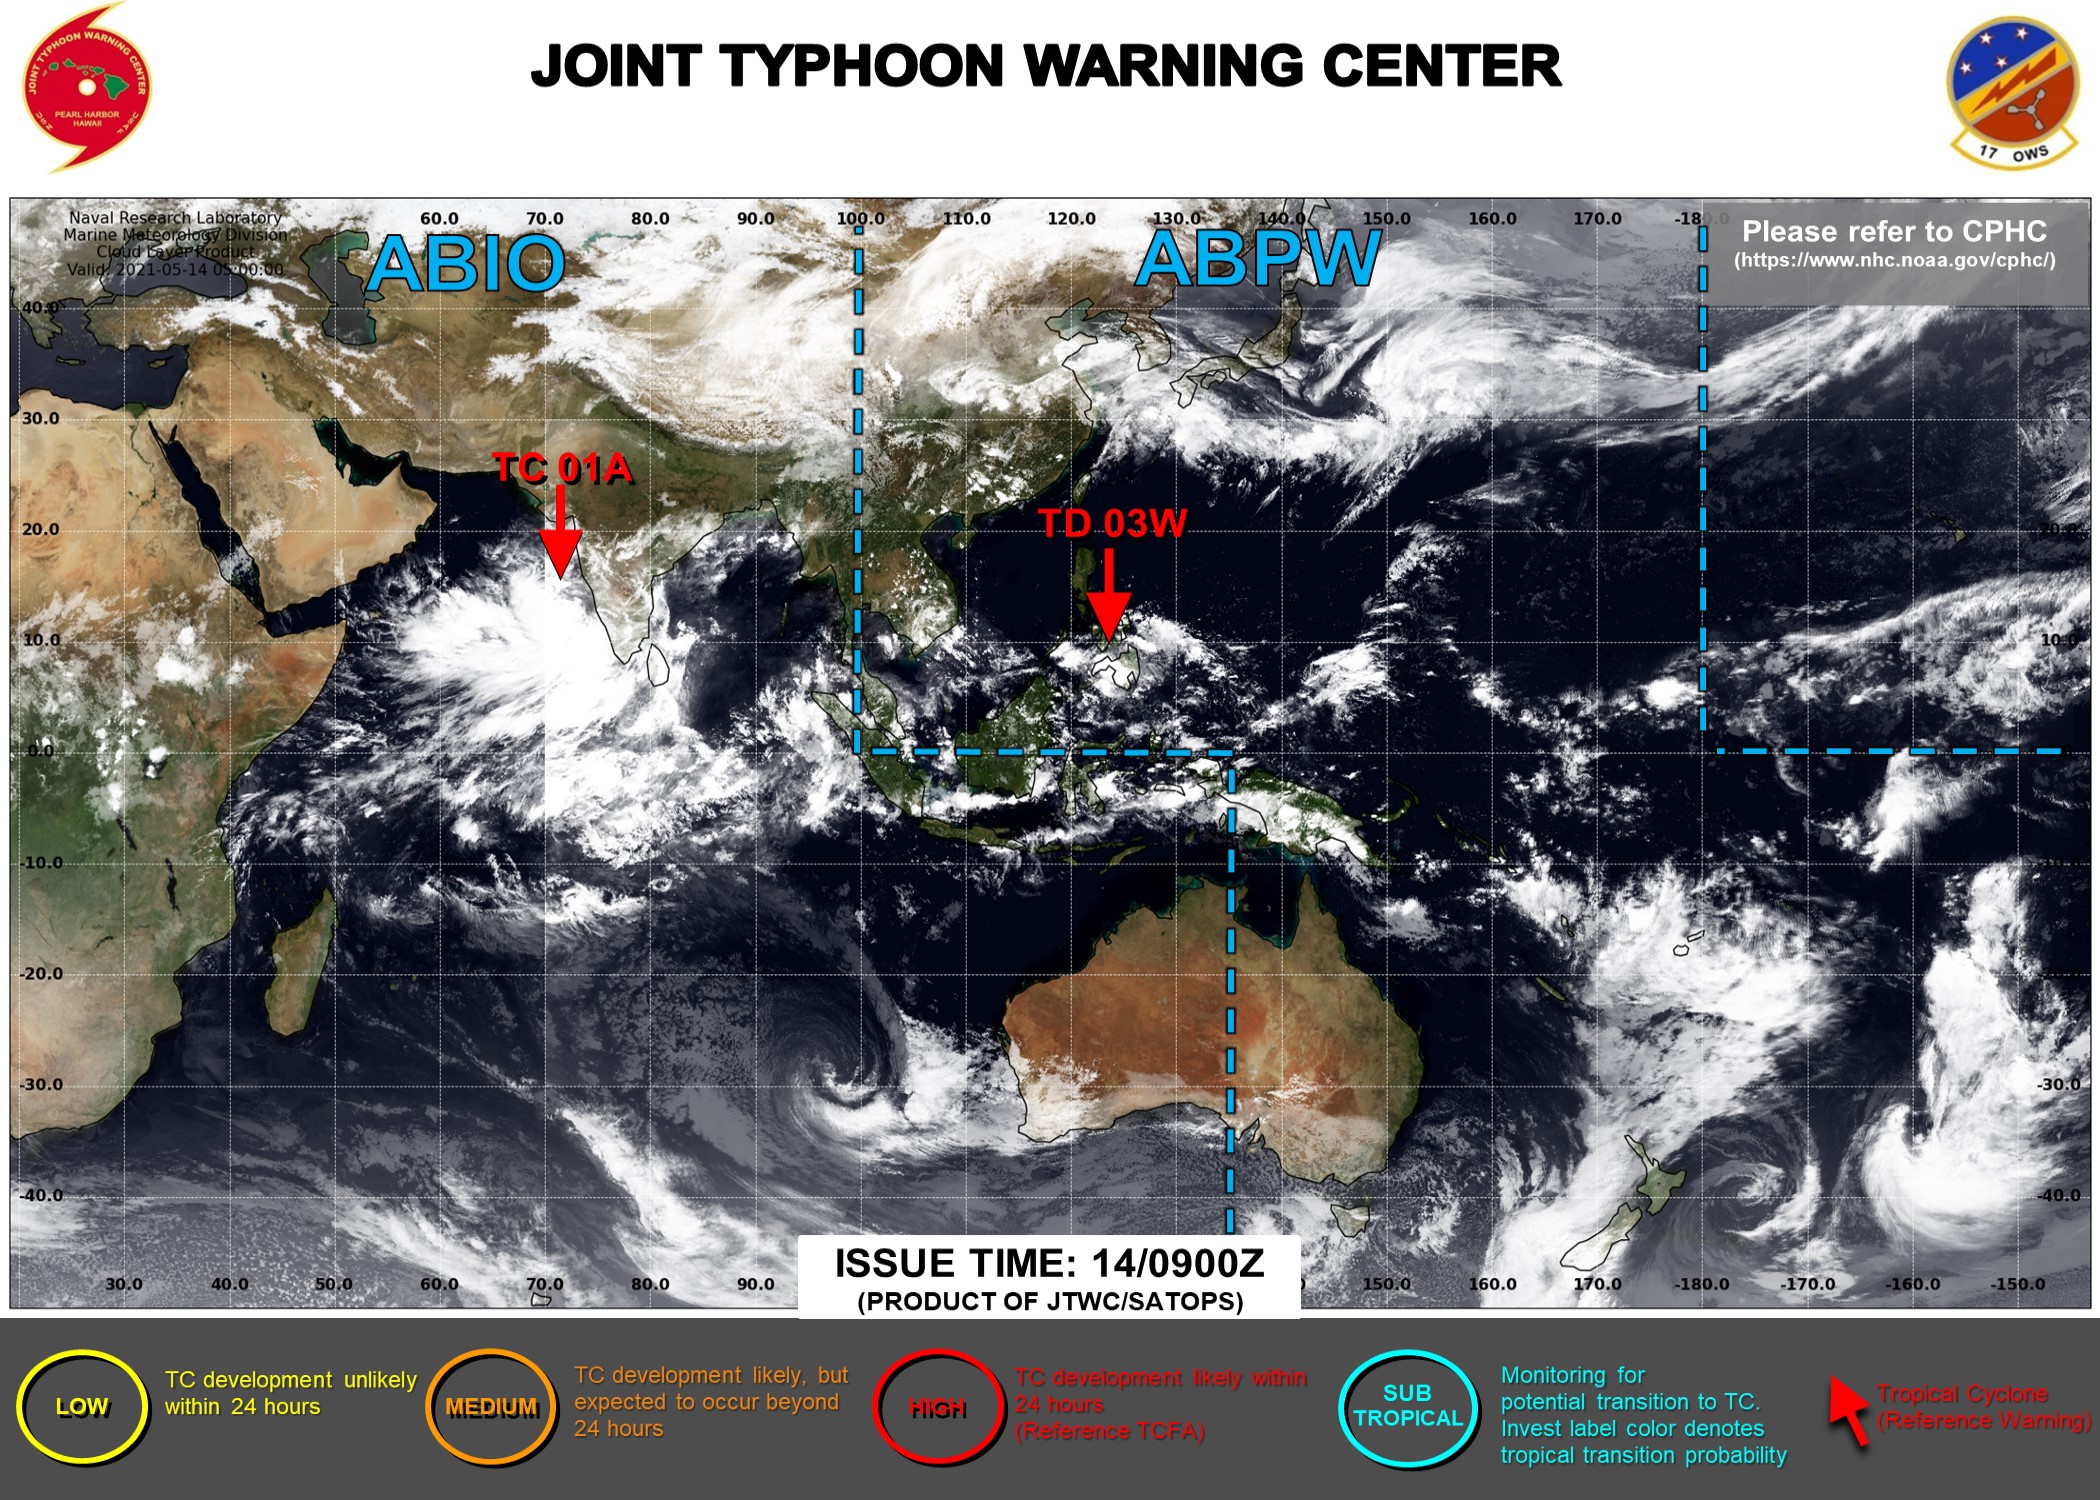 14/09UTC. JTWC IS ISSUING 6HOURLY WARNINGS ON TD 03W AND TC 01A. 3HOURLY SATELLITE BULLETINS ARE ISSUED FOR BOTH SYSTEMS.